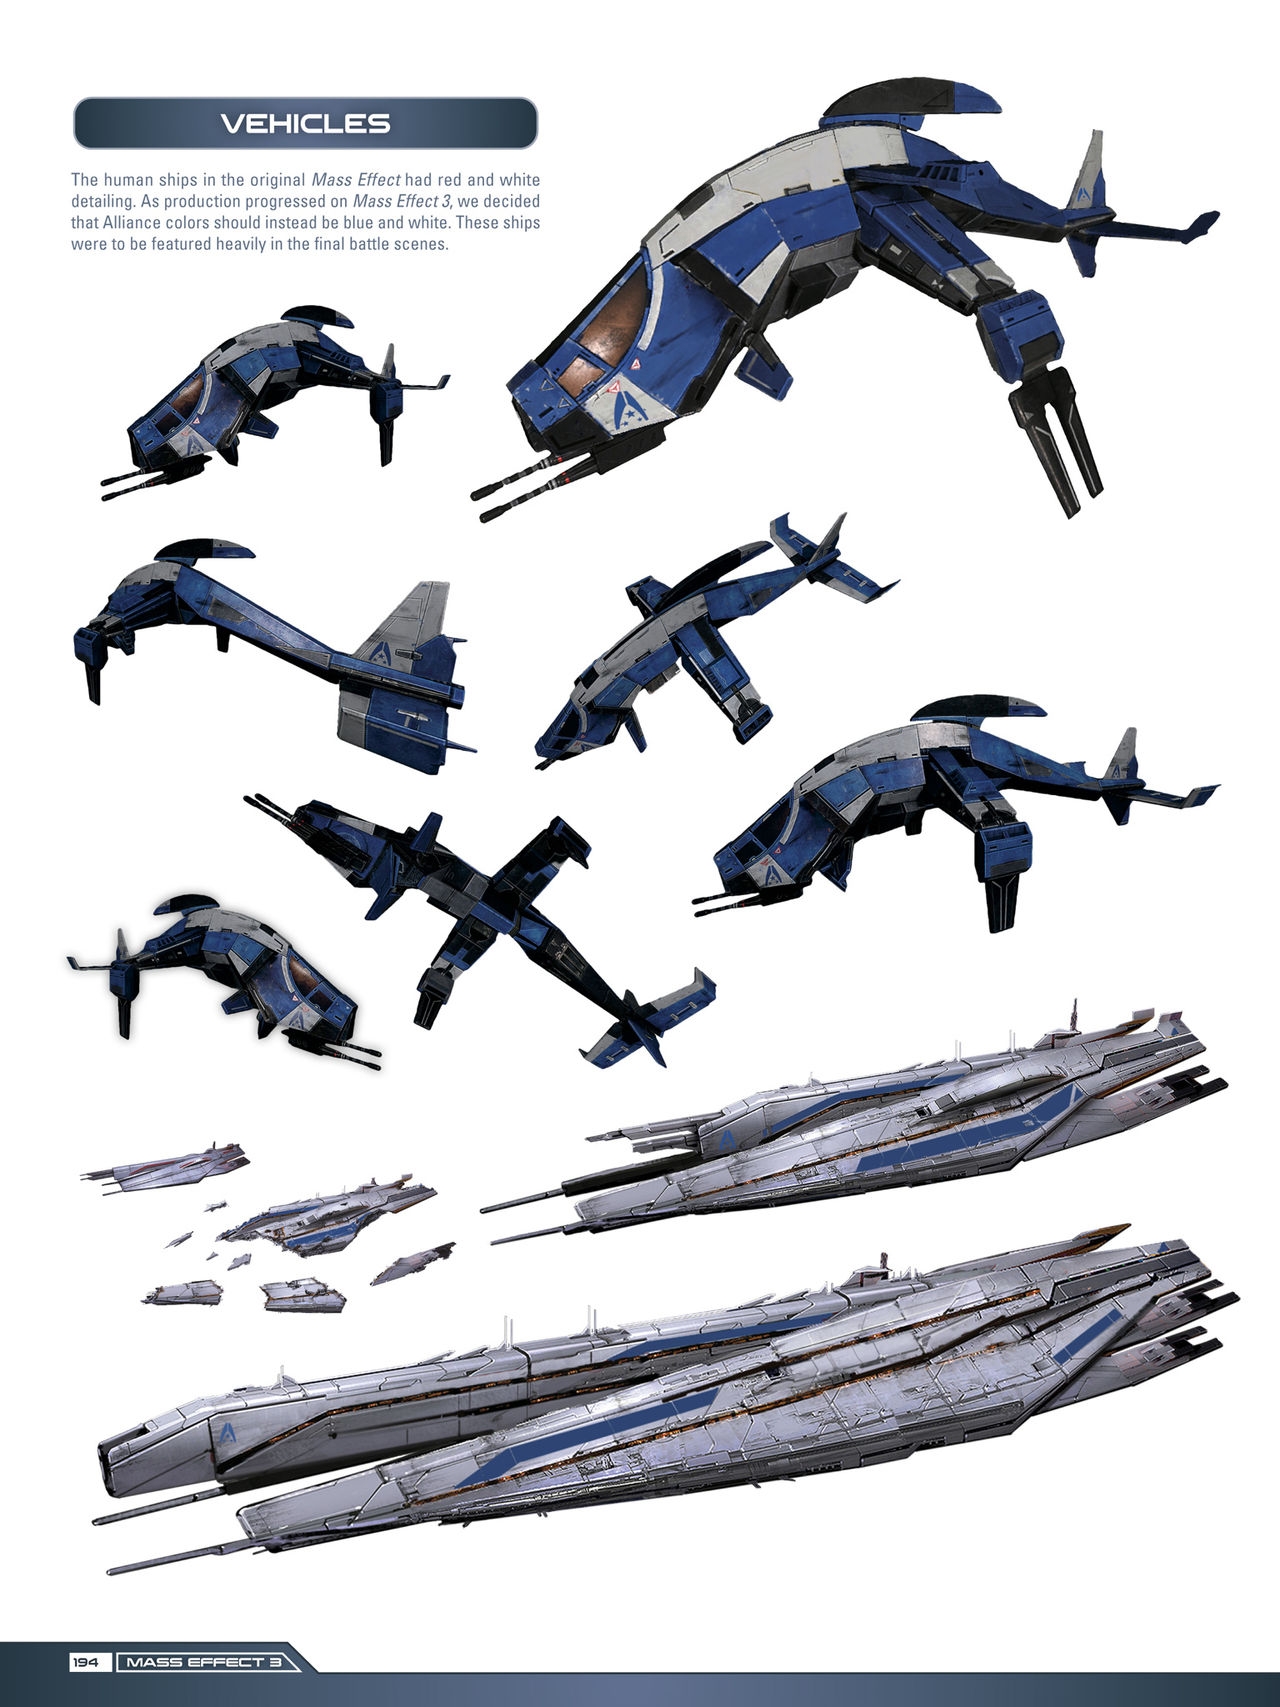 The Art of the Mass Effect Trilogy - Expanded Edition 193